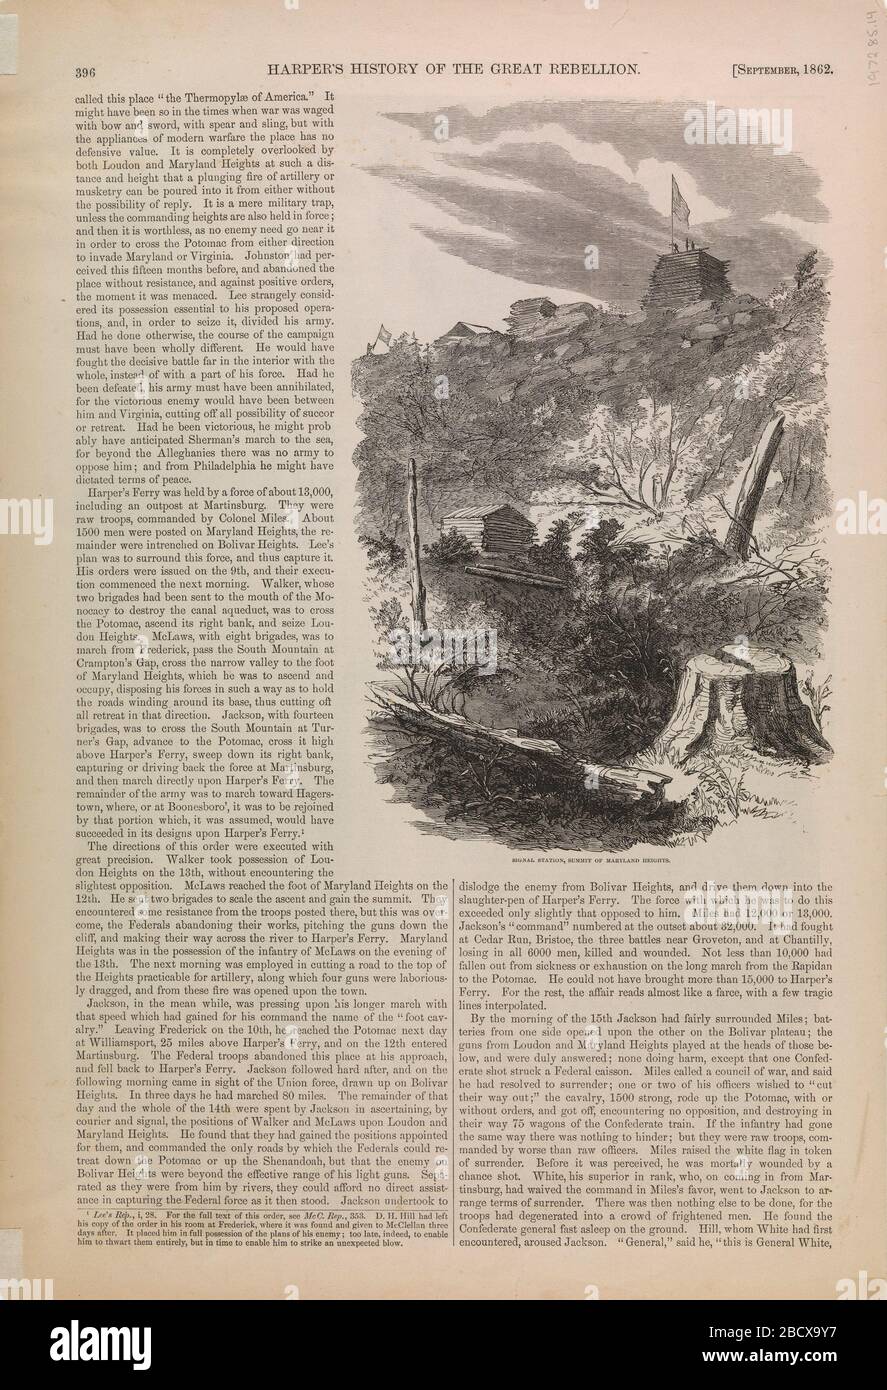 Signal Station Summit of Maryland Heights from Harpers History of the Great Rebellion. Stock Photo